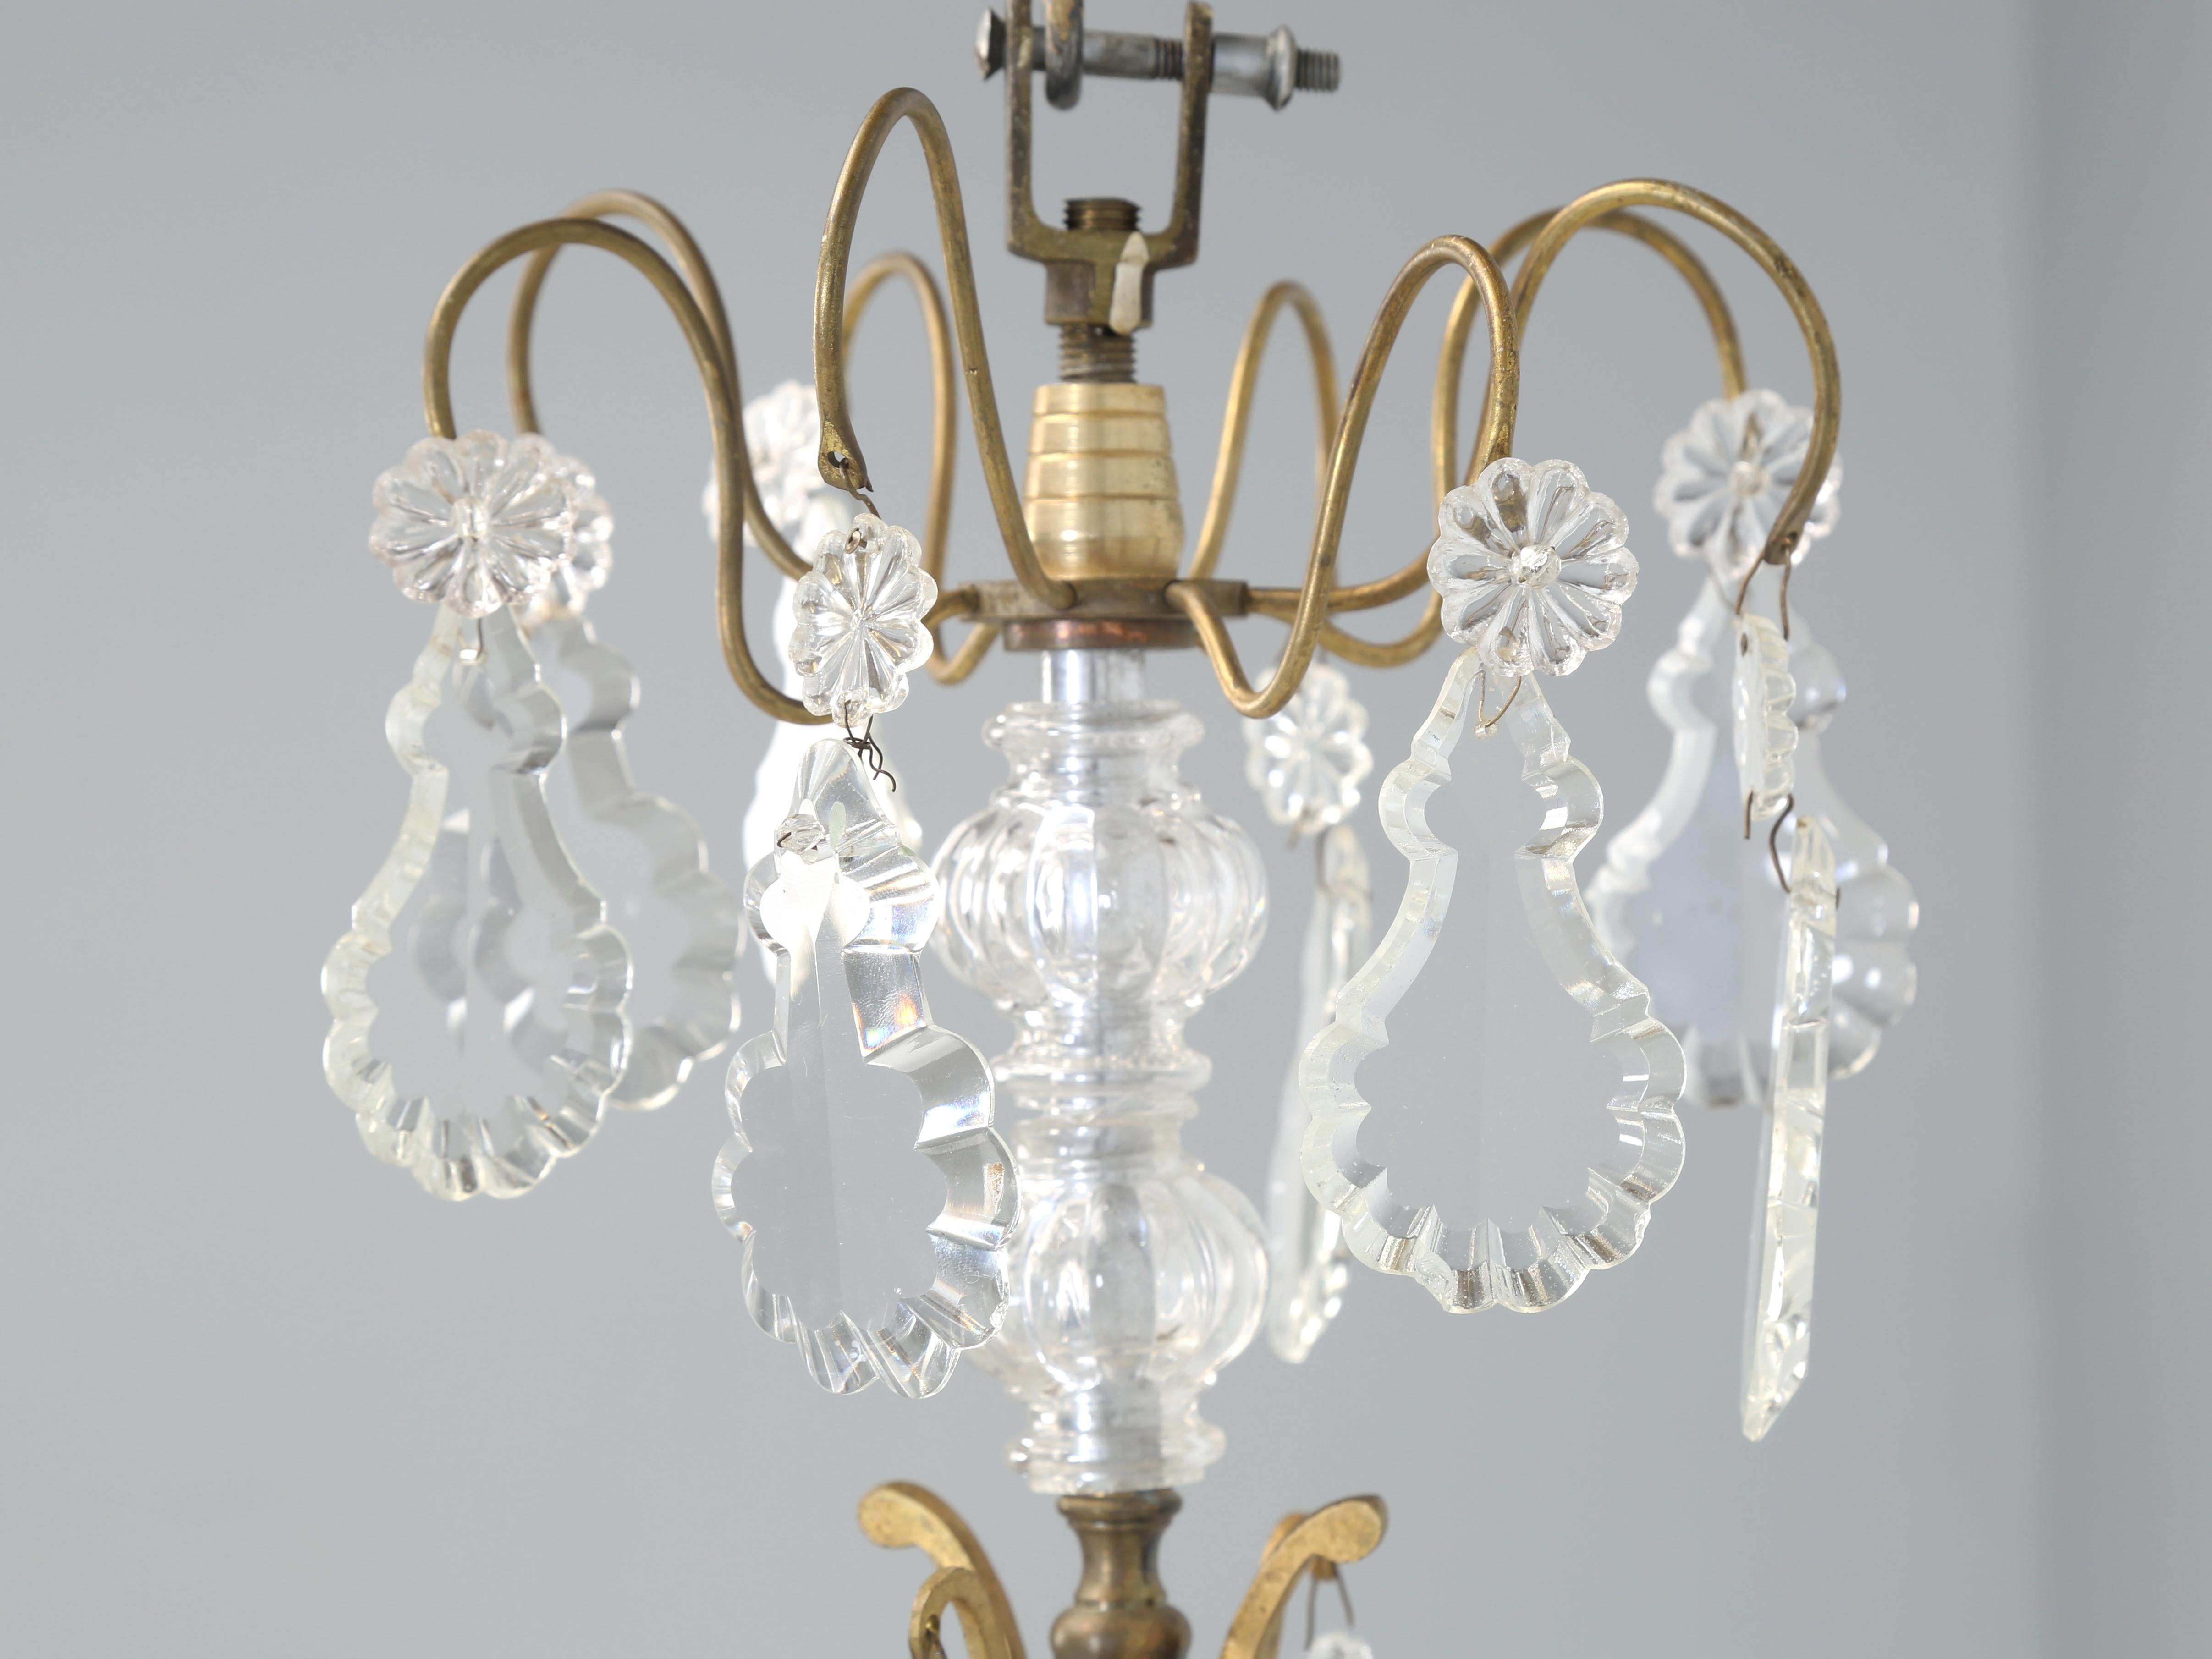 What at first looked to be your ordinary French Crystal Chandelier that no one bothered to wire for lightbulbs, turned out to be something quite special. Our first hint was the hand-blown sphere at the bottom of the Antique French Chandelier, which